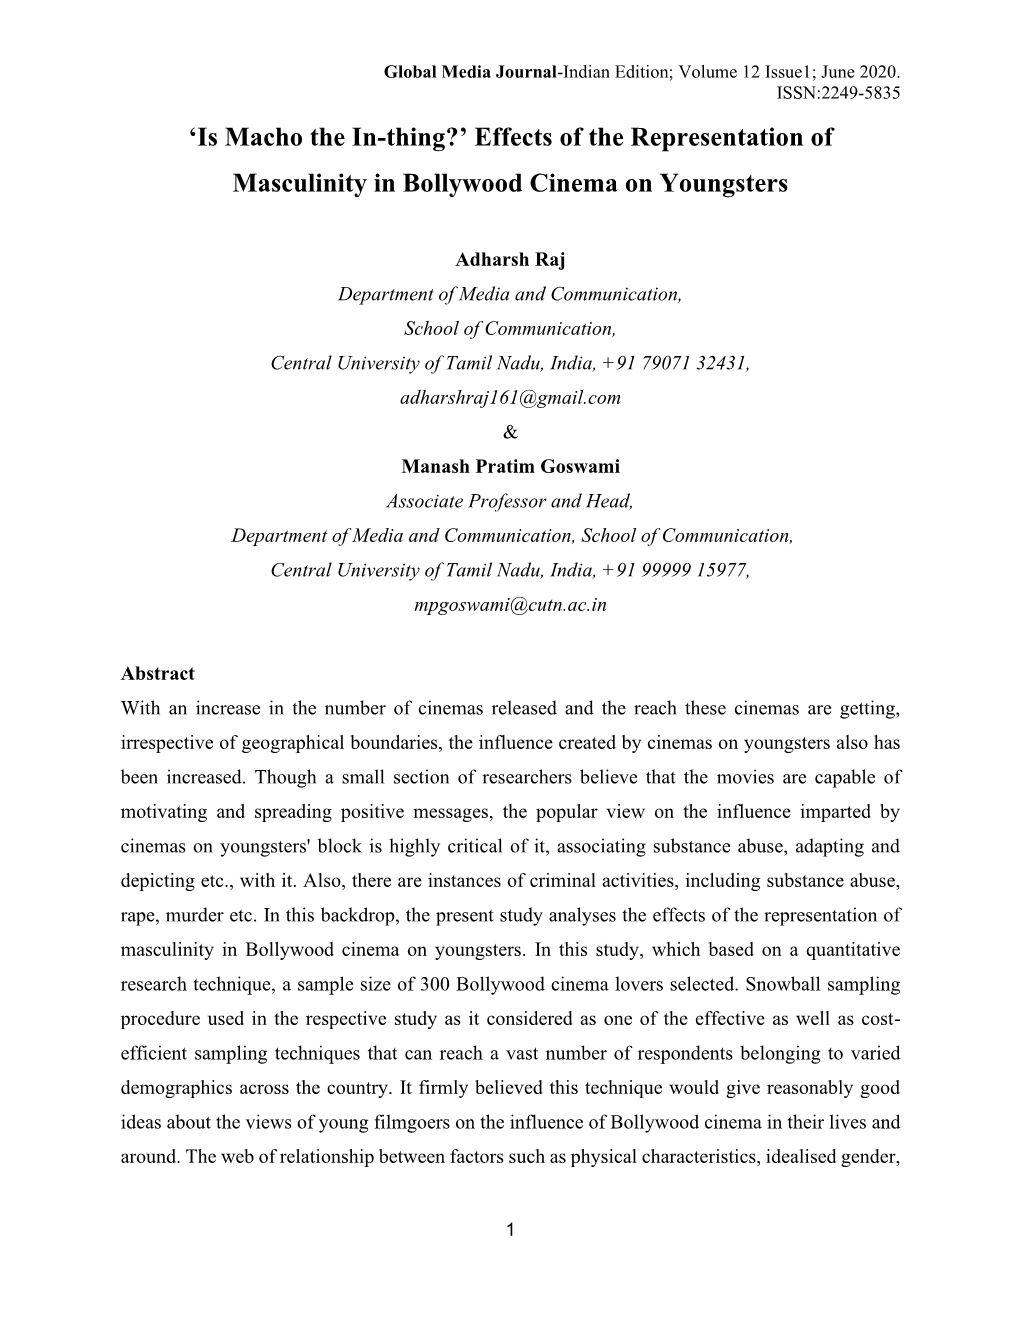 'Is Macho the In-Thing?' Effects of the Representation of Masculinity In